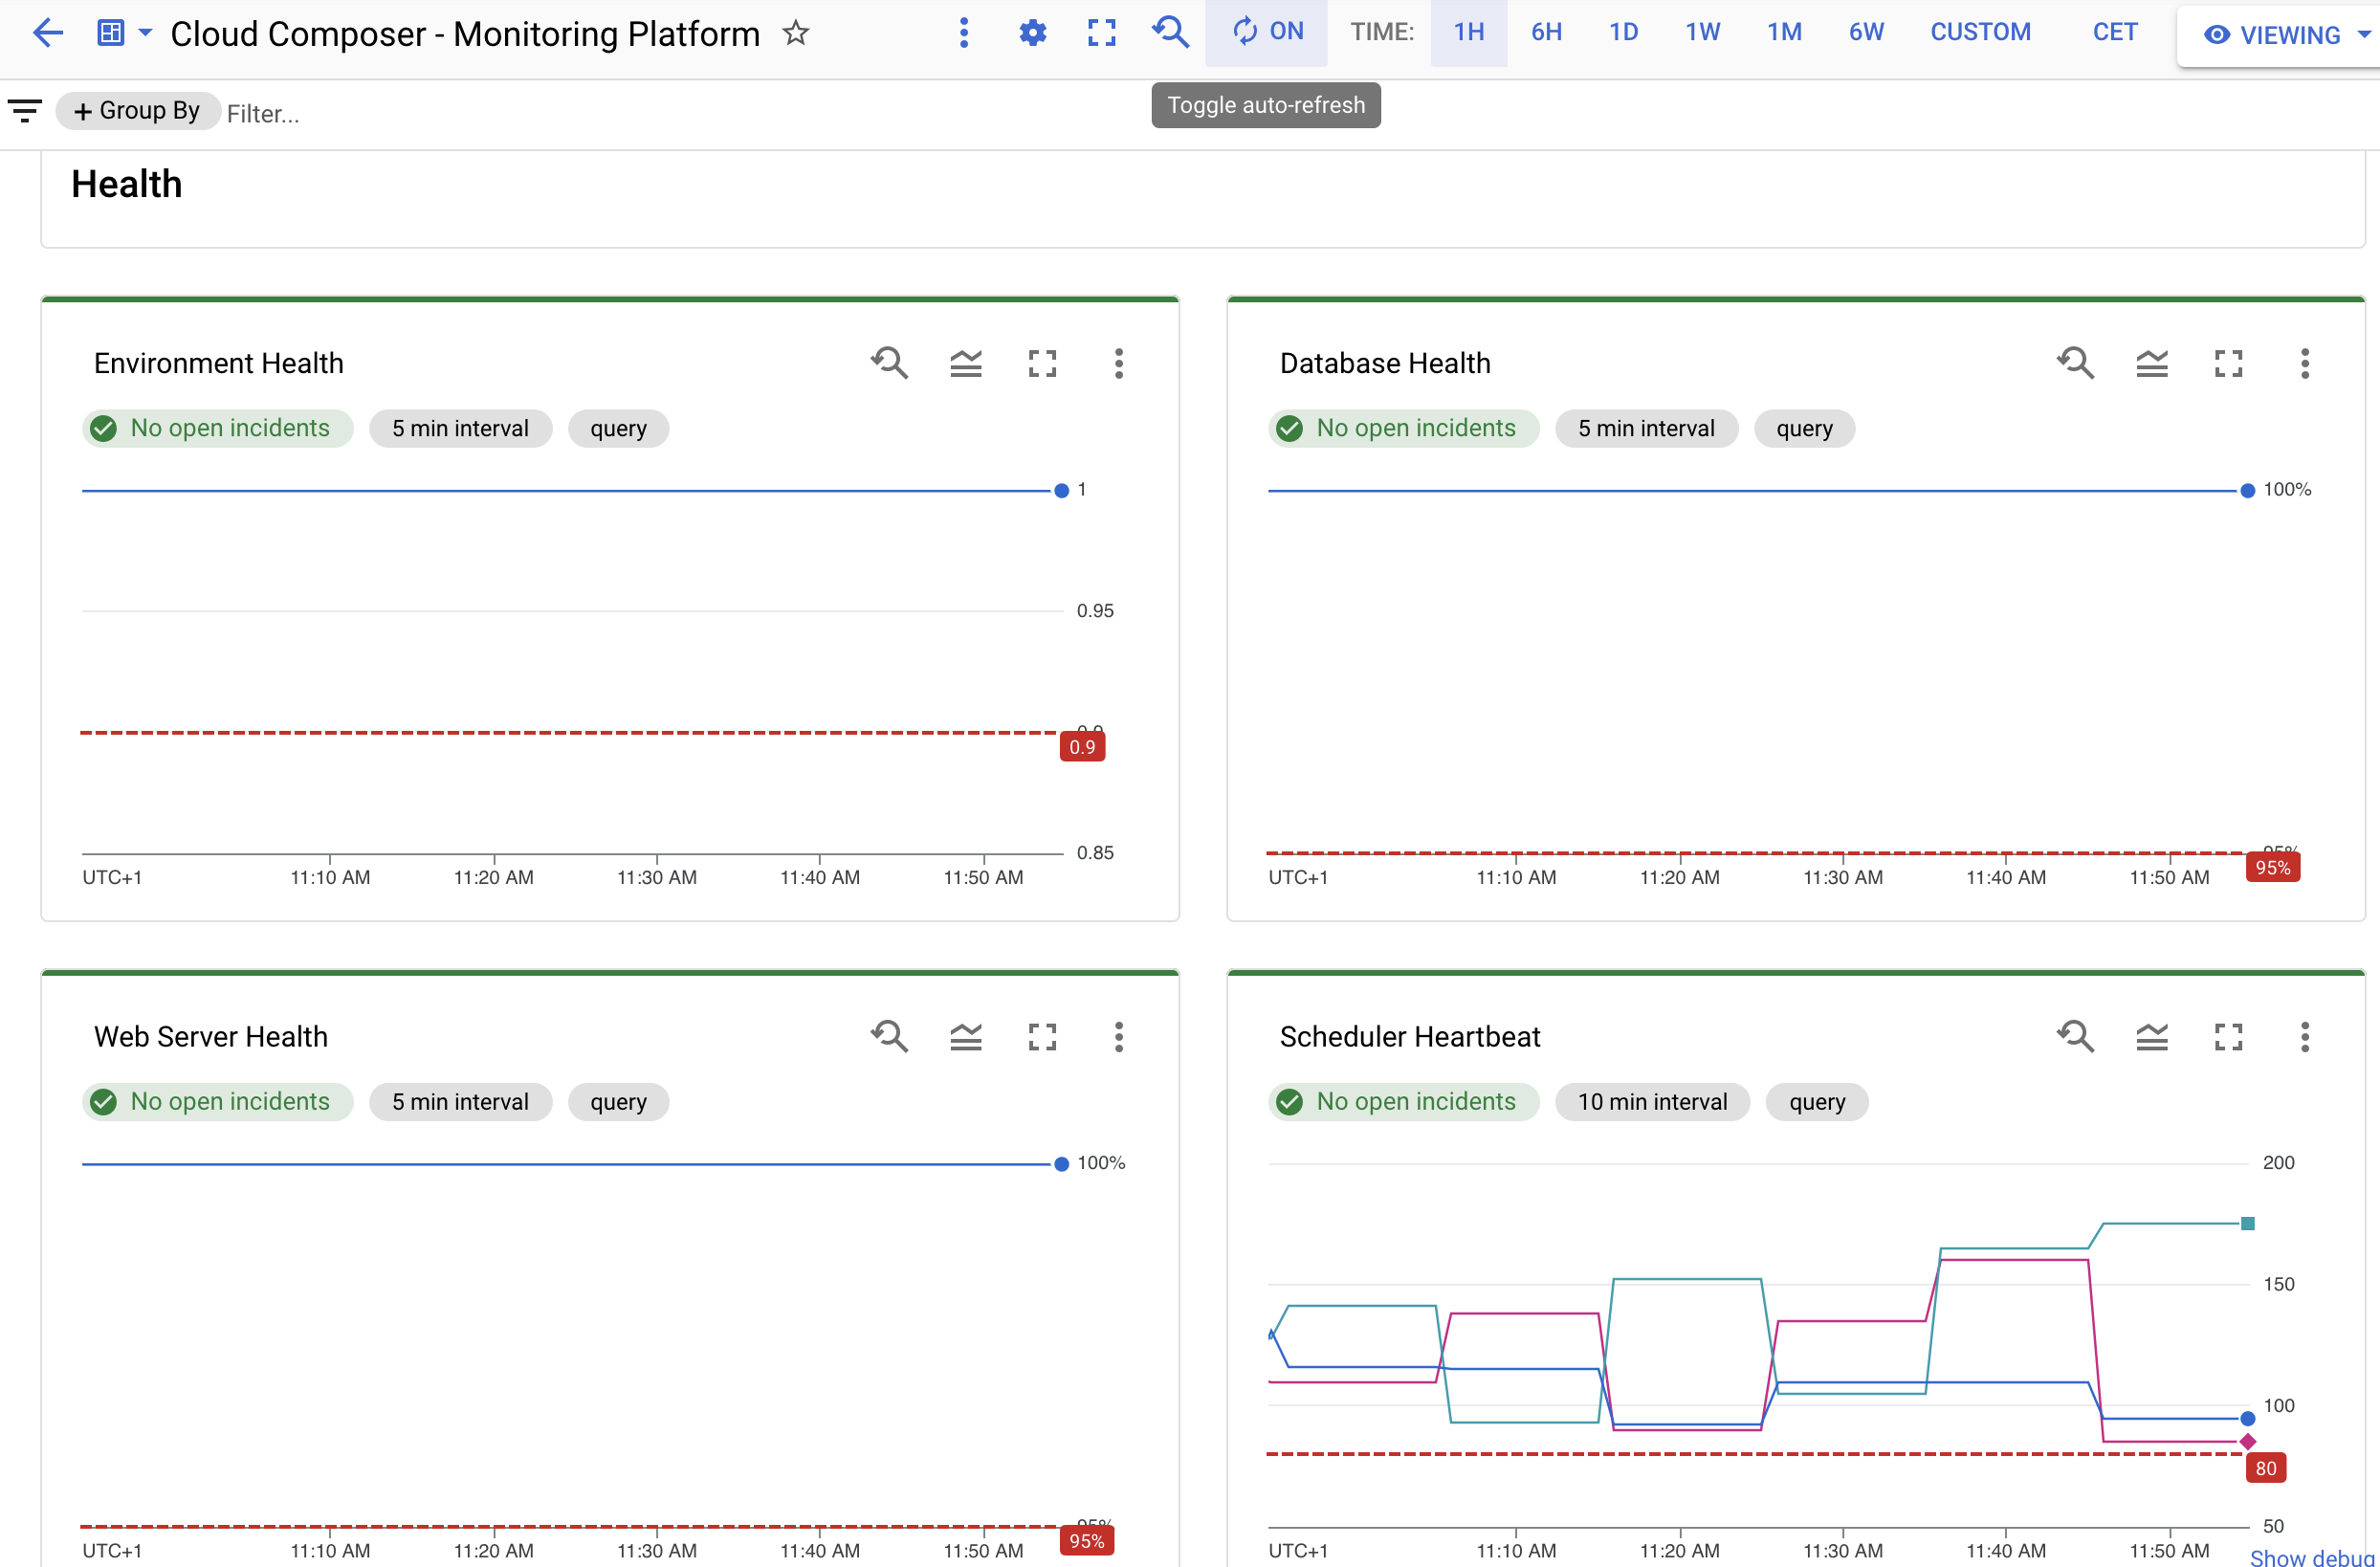 Screenshot of the monitoring dashboard showing Environment Health, Database Health, Webserver Health, and Scheduler Heartbeat